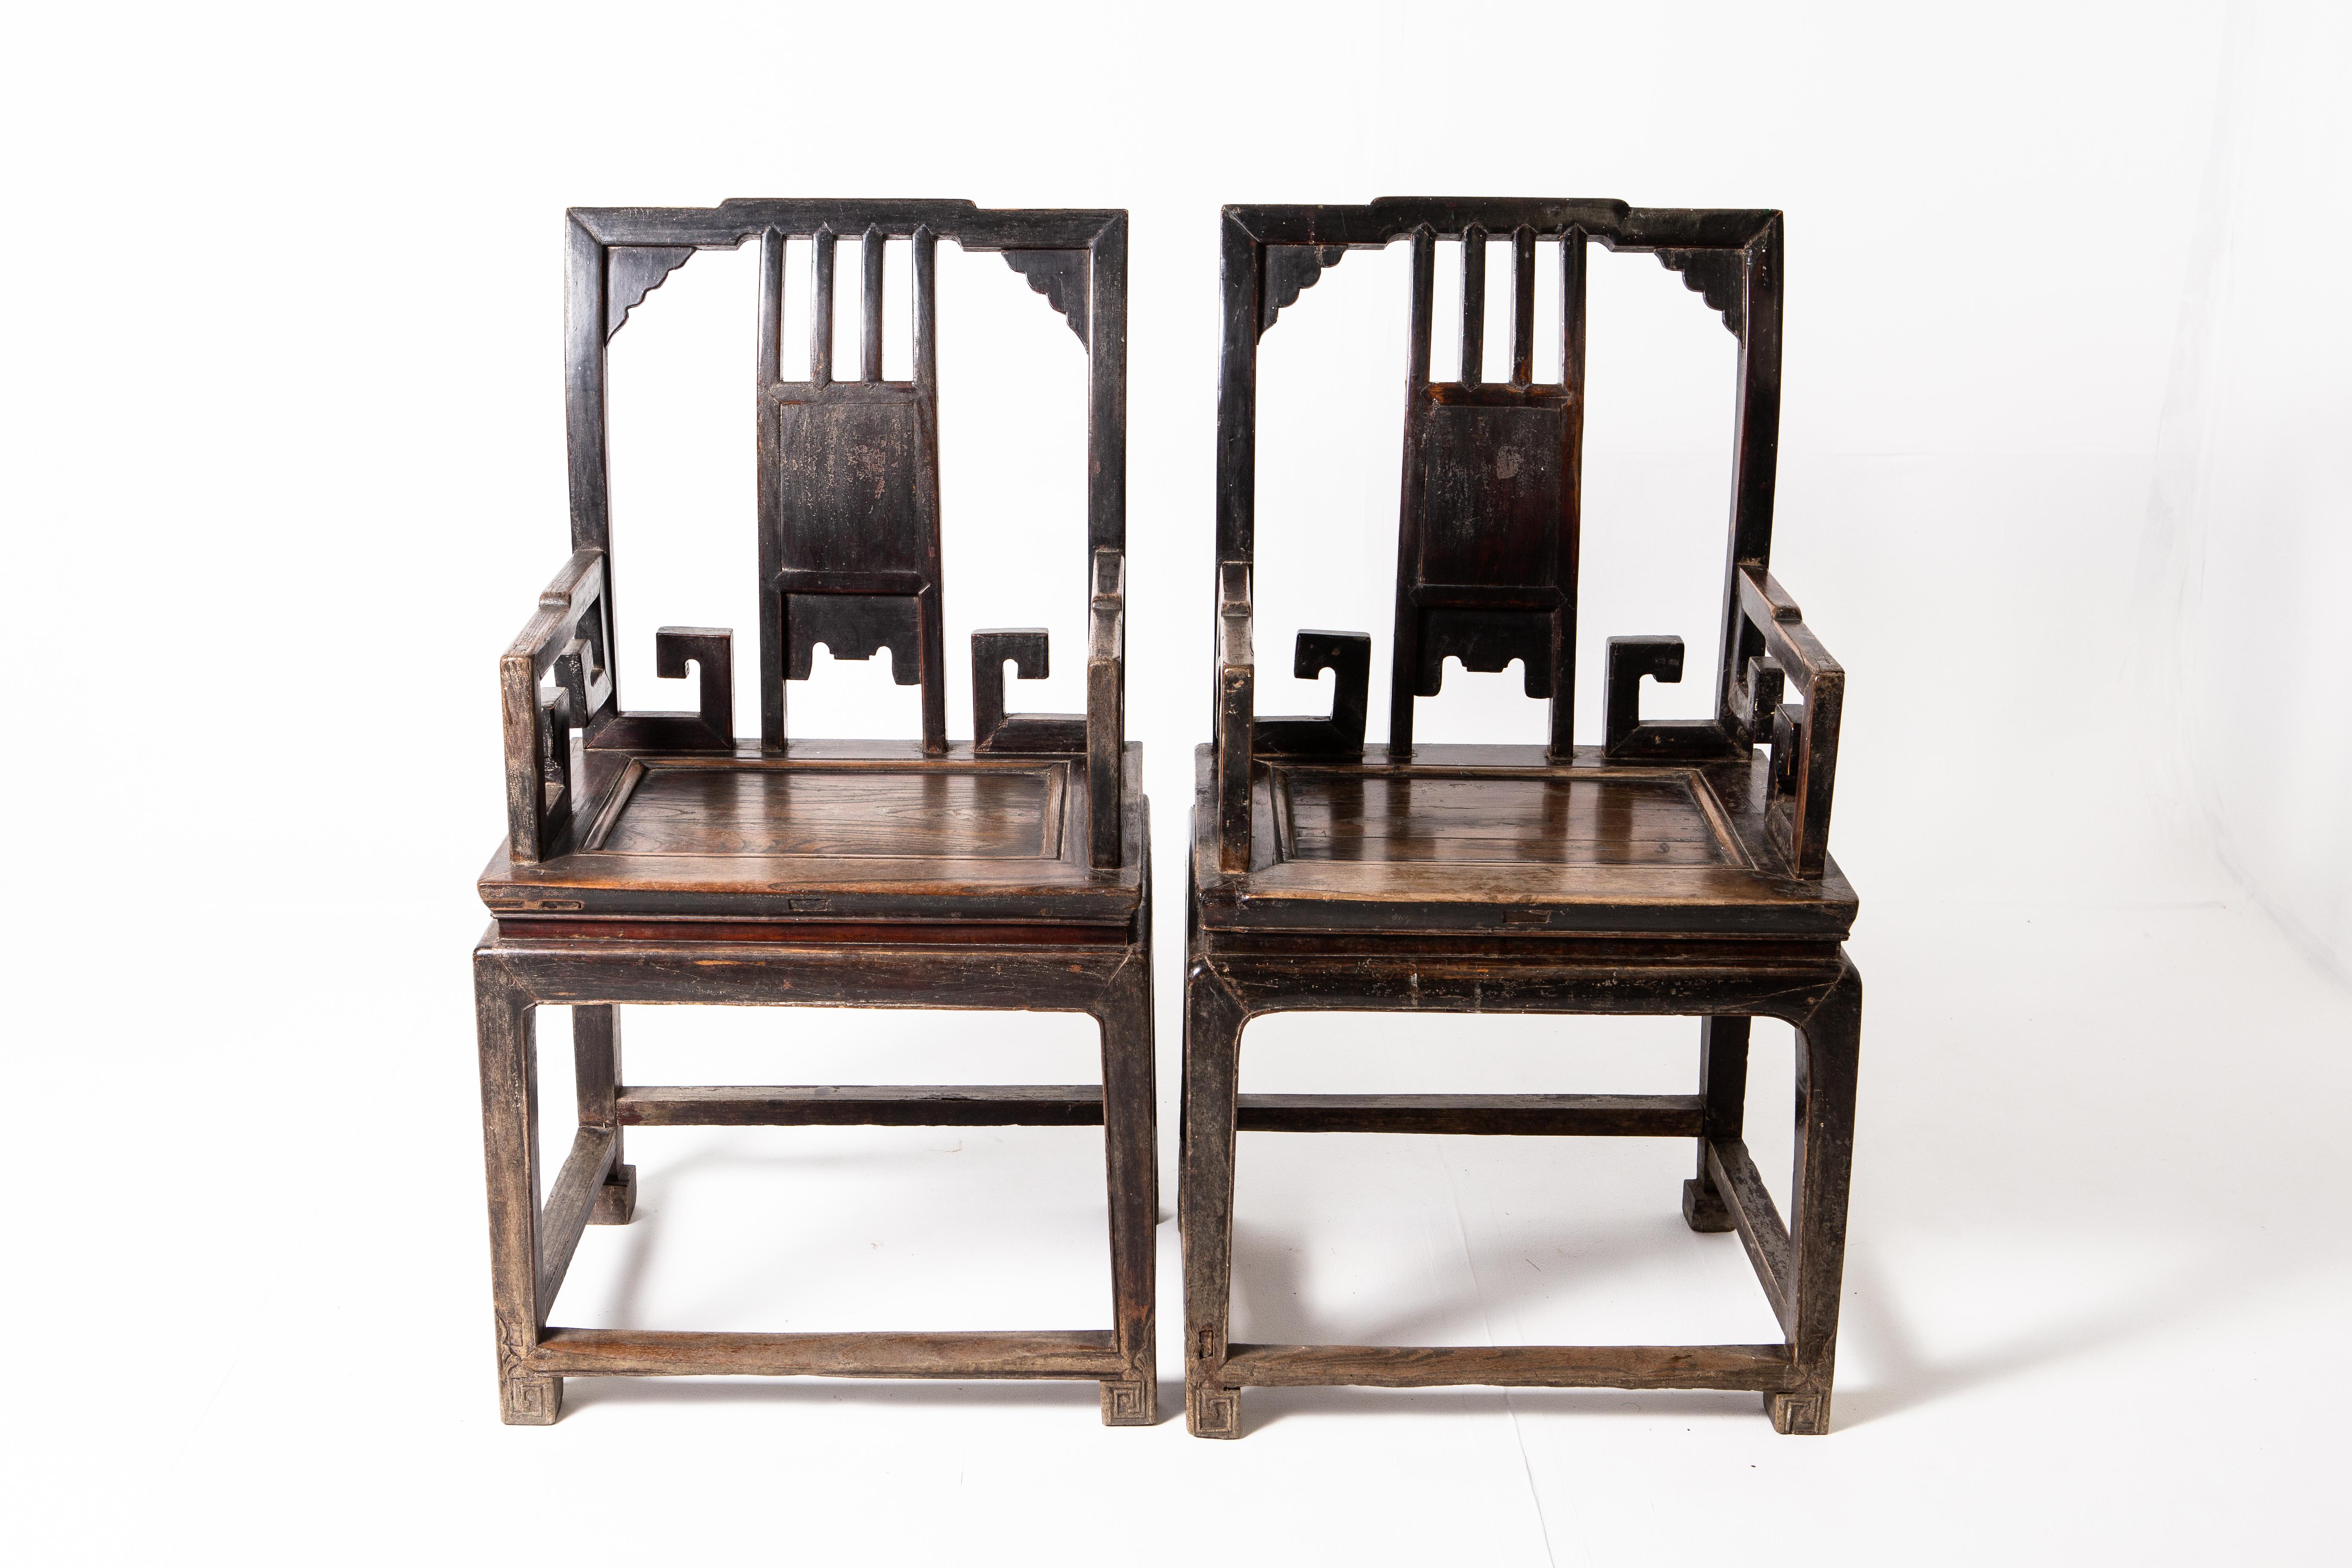 These handsome chairs are from the mid-Qing dynasty period and they feature unique scroll carvings under the armrest. The chair is made of two parts: a waisted stool and an upper backrest that resembles a screen panel. Stout and with a generous cut,